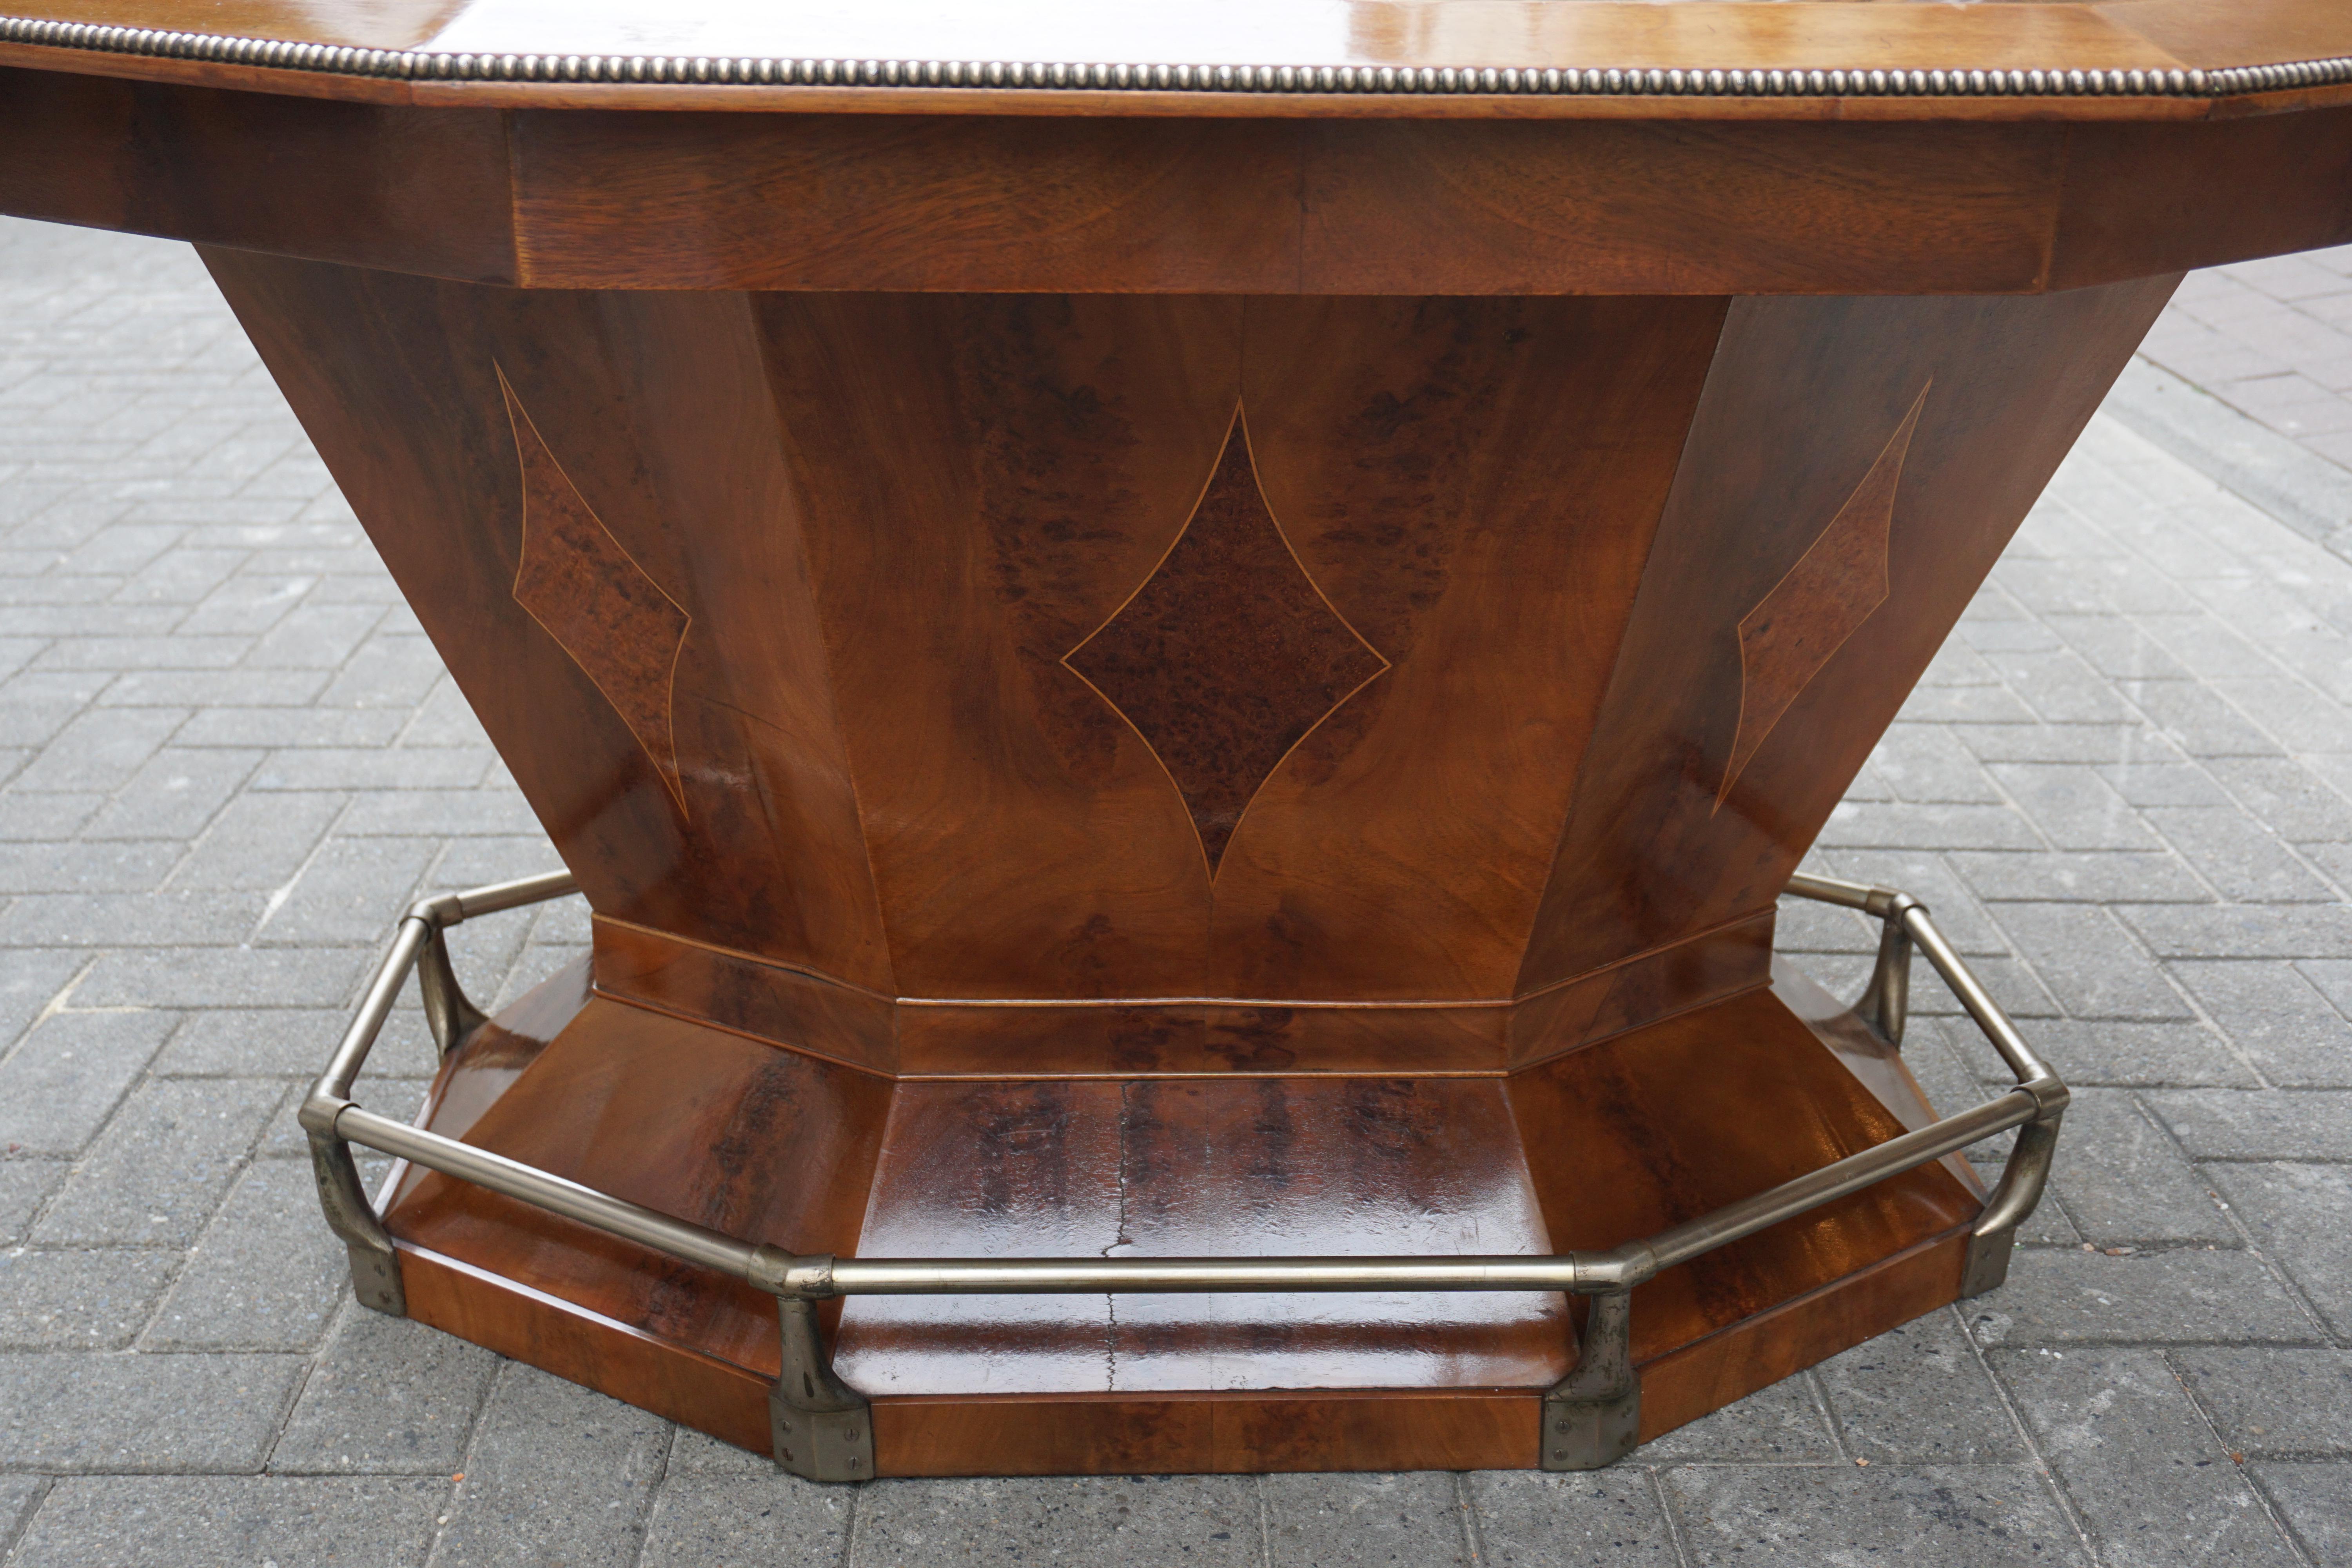 Rare Art Deco Dining or Conference Table in the Shape of an Octagonal Diamond For Sale 11